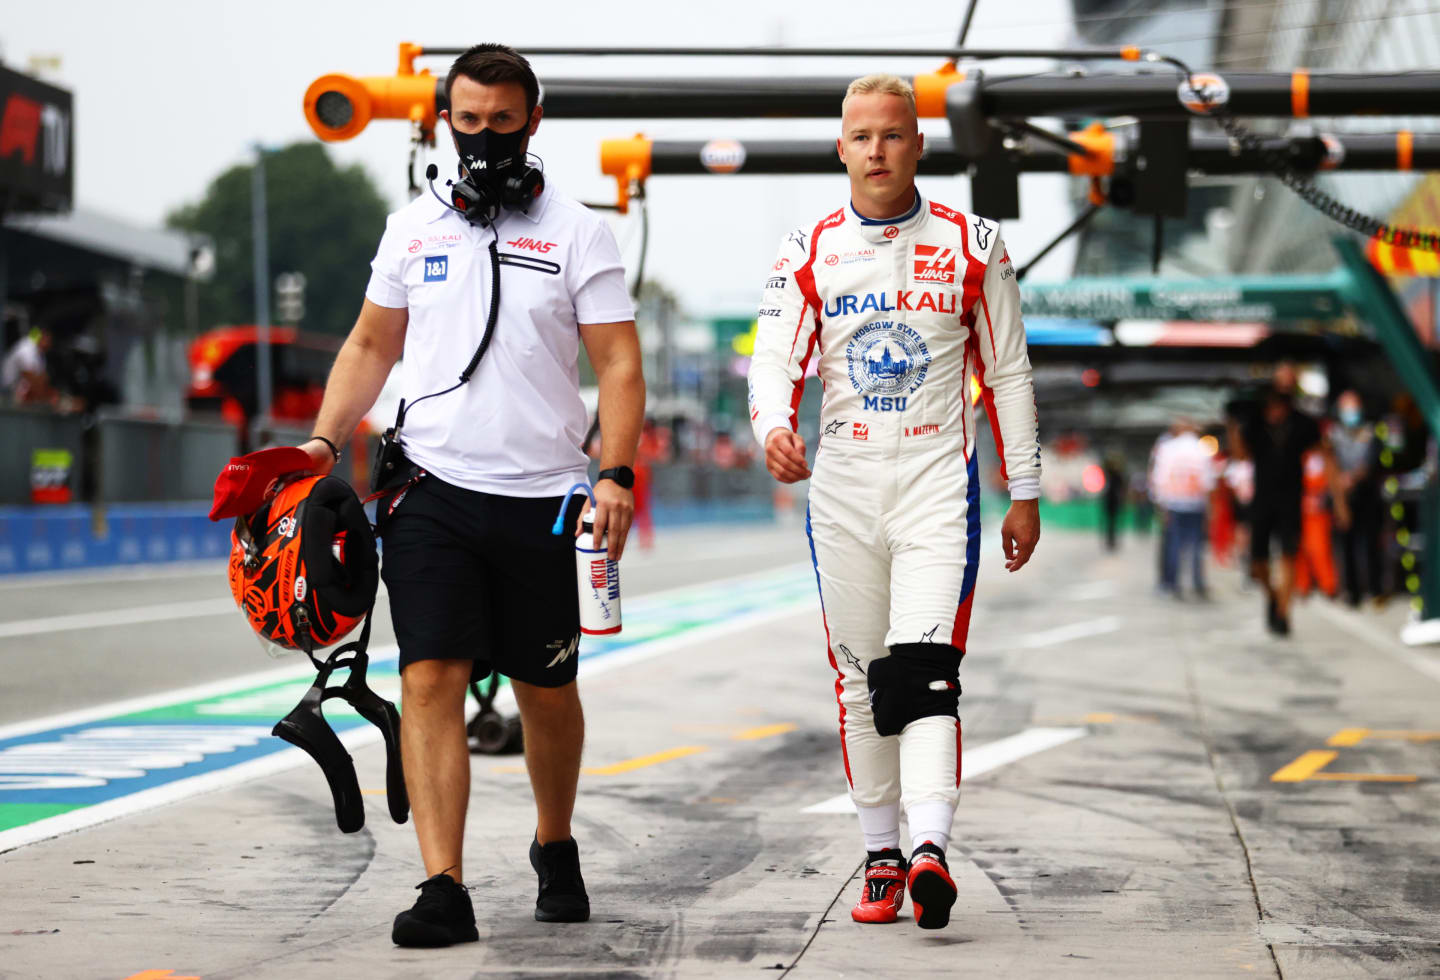 MONZA, ITALY - SEPTEMBER 10: Nikita Mazepin of Russia and Haas F1 walks in the Pitlane during qualifying ahead of the F1 Grand Prix of Italy at Autodromo di Monza on September 10, 2021 in Monza, Italy. (Photo by Bryn Lennon/Getty Images)